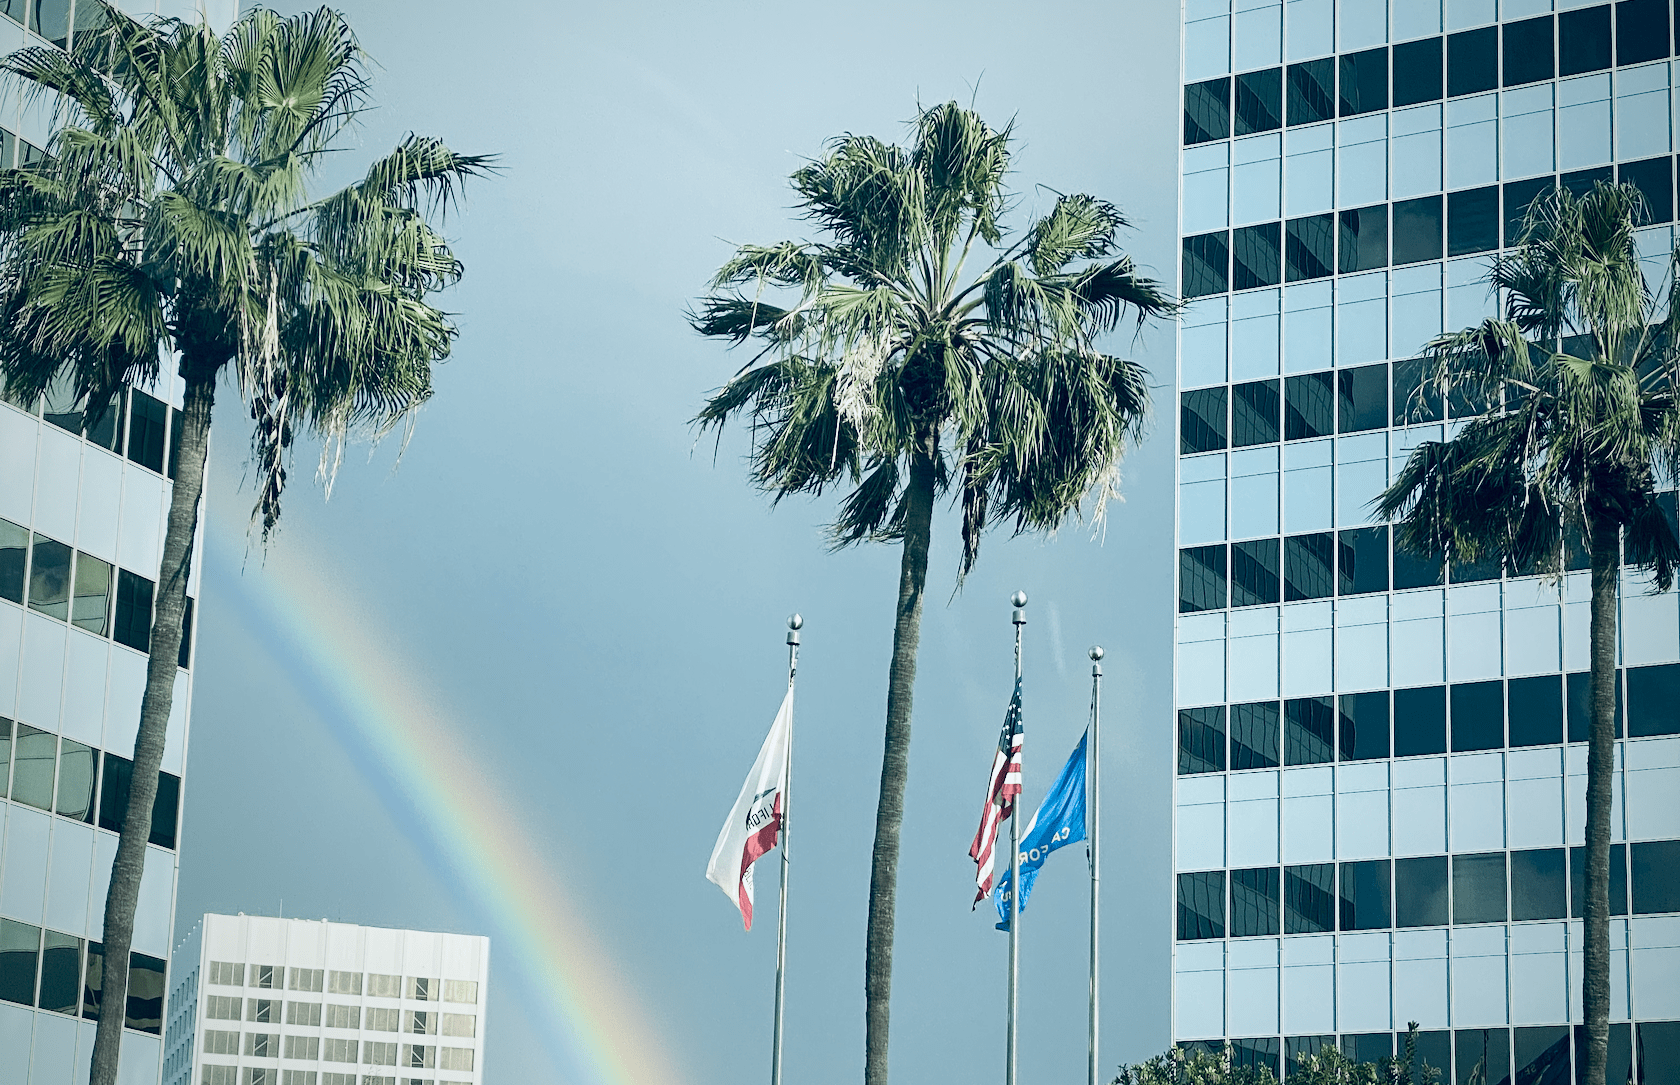 Three palm trees in front of a gray sky and office buildings, and a rainbow